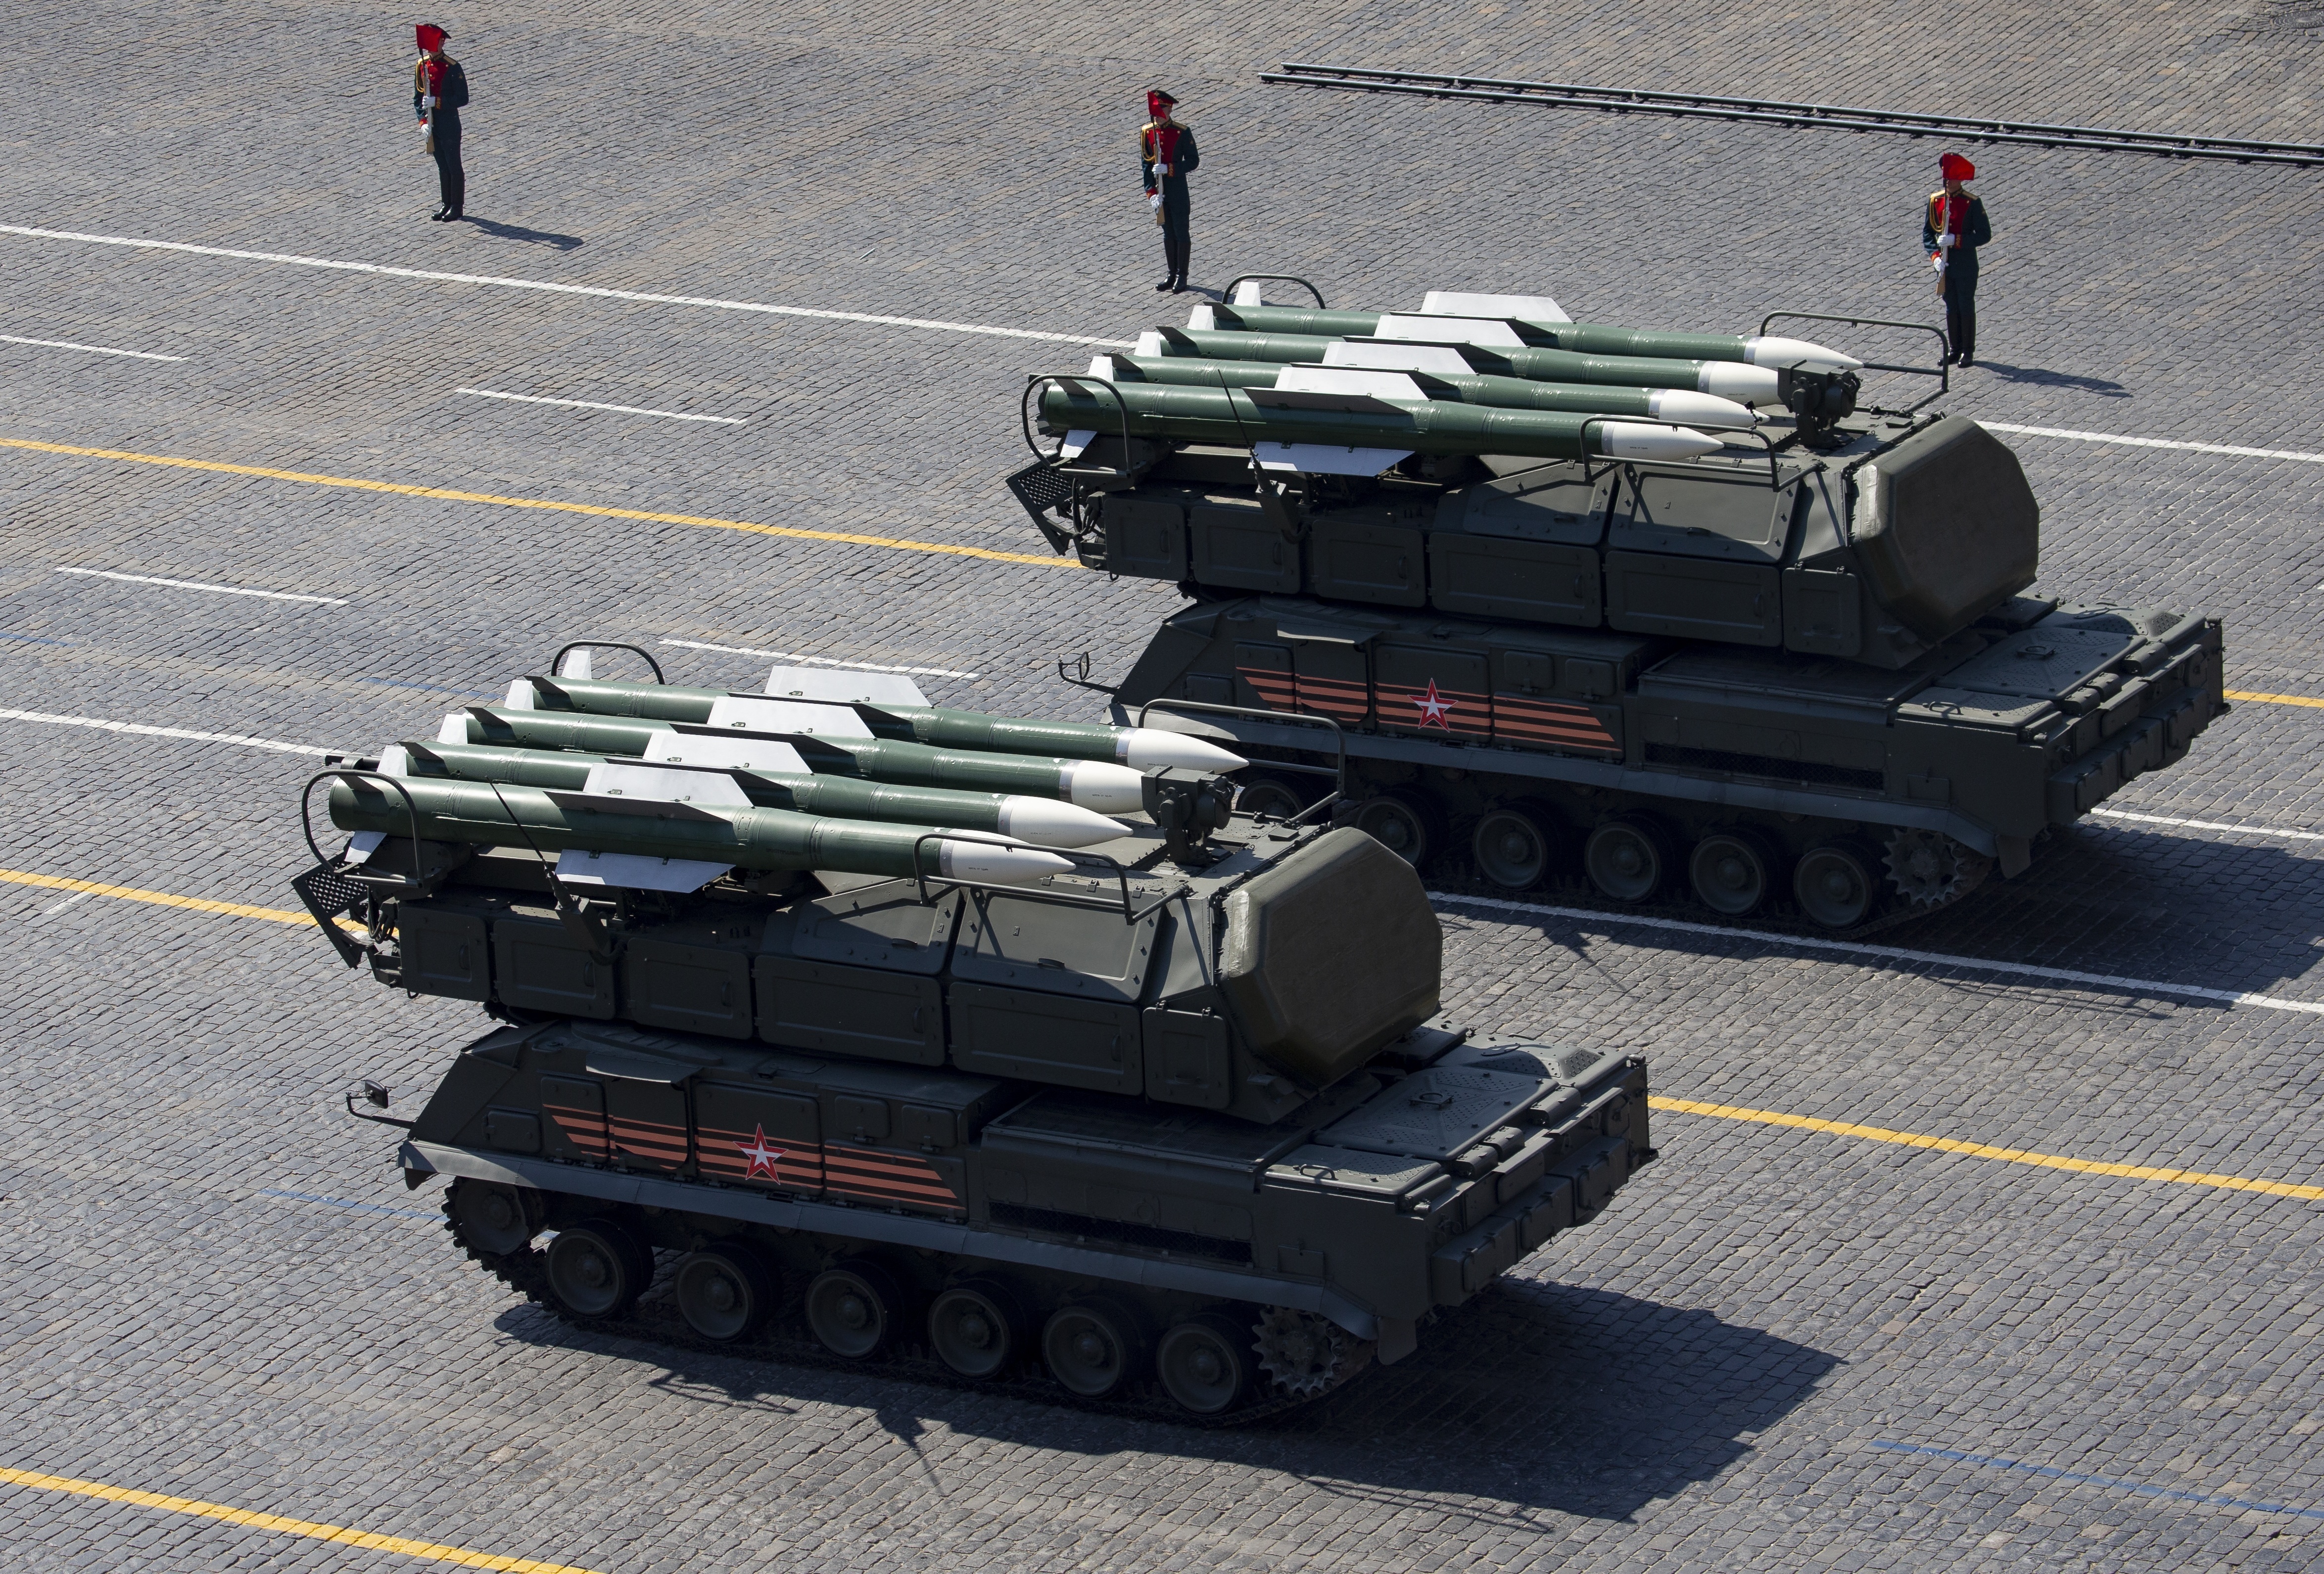 Russian Buk-M2 air defense missile systems drive down Red Square during a rehearsal for the Victory Day military parade in Moscow, Russia, Tuesday, May 7, 2019 . The parade will take place at Moscow's Red Square on May 9 to celebrate 74 years of the victory in WWII. (AP Photo/Alexander Zemlianichenko, Pool)